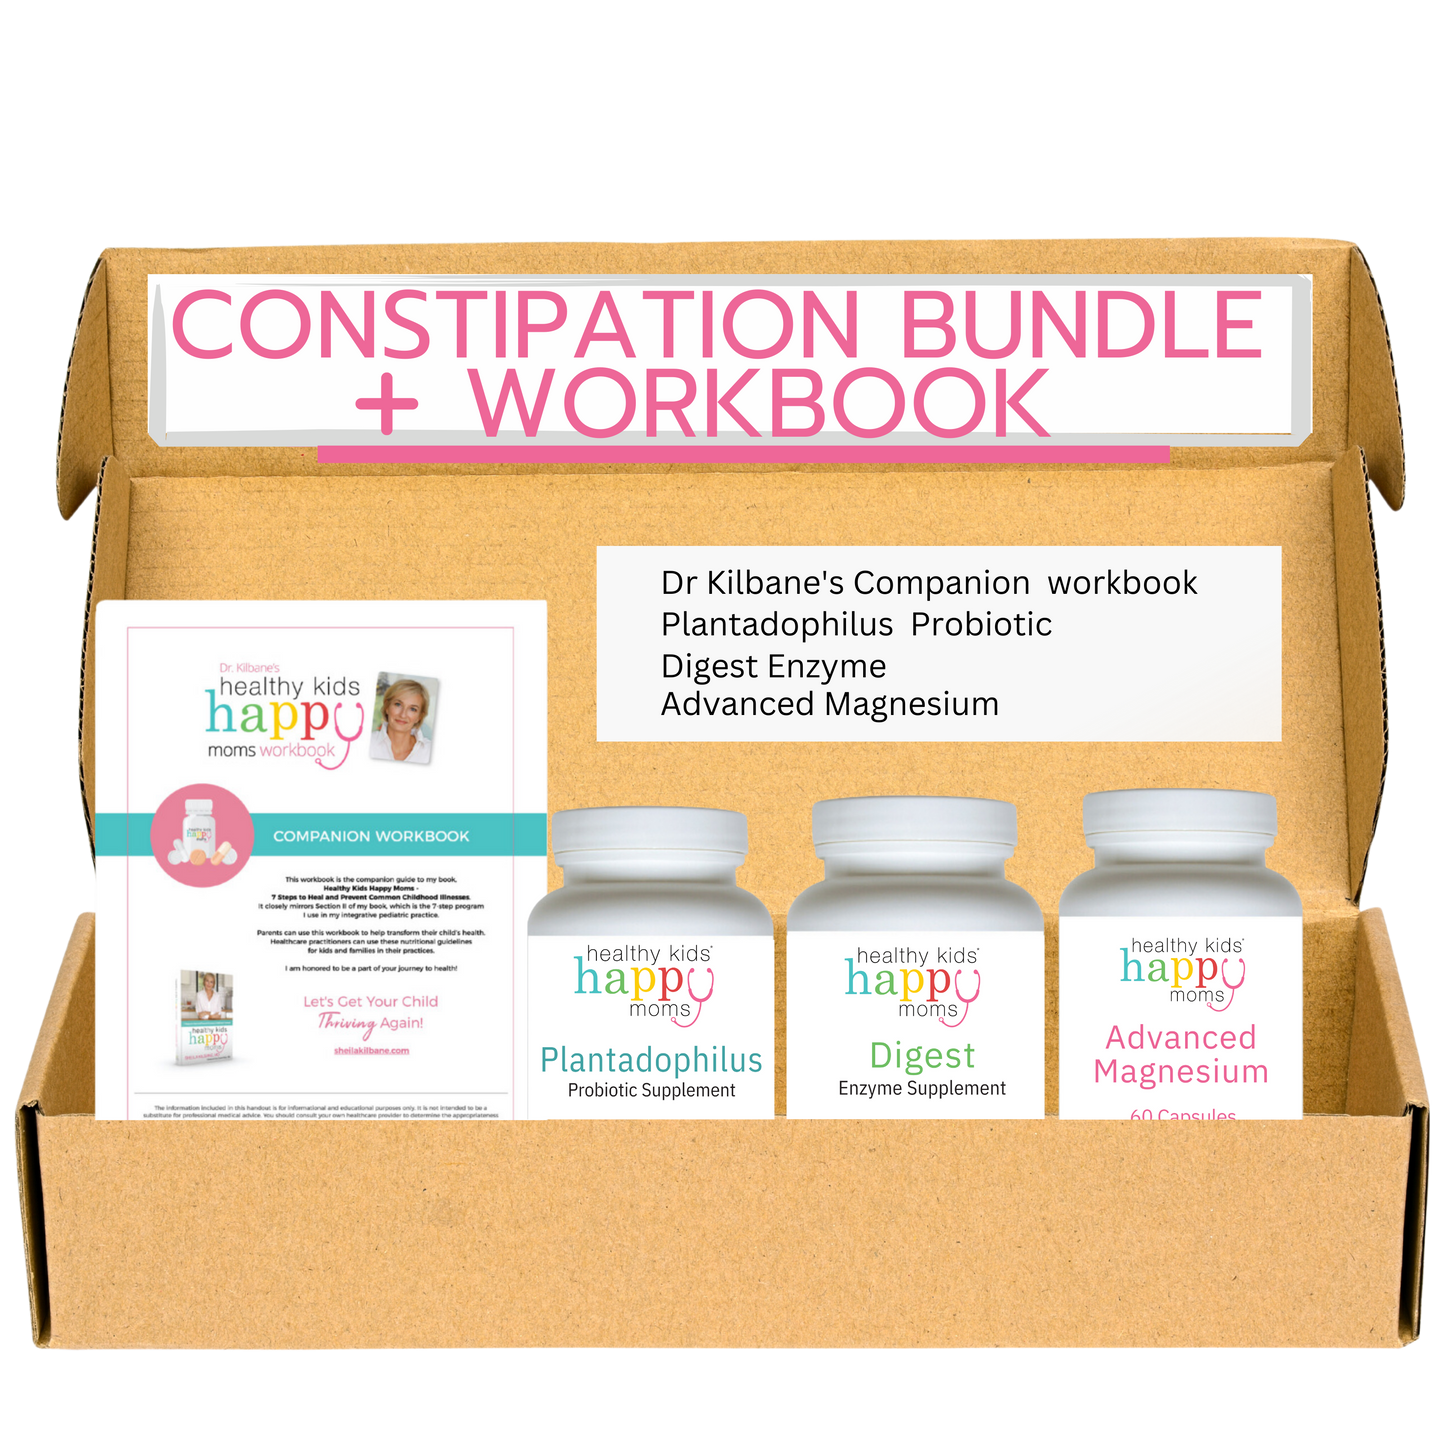 Treating Constipation Naturally - the DIY Version (Workbook & Constipation Bundle)